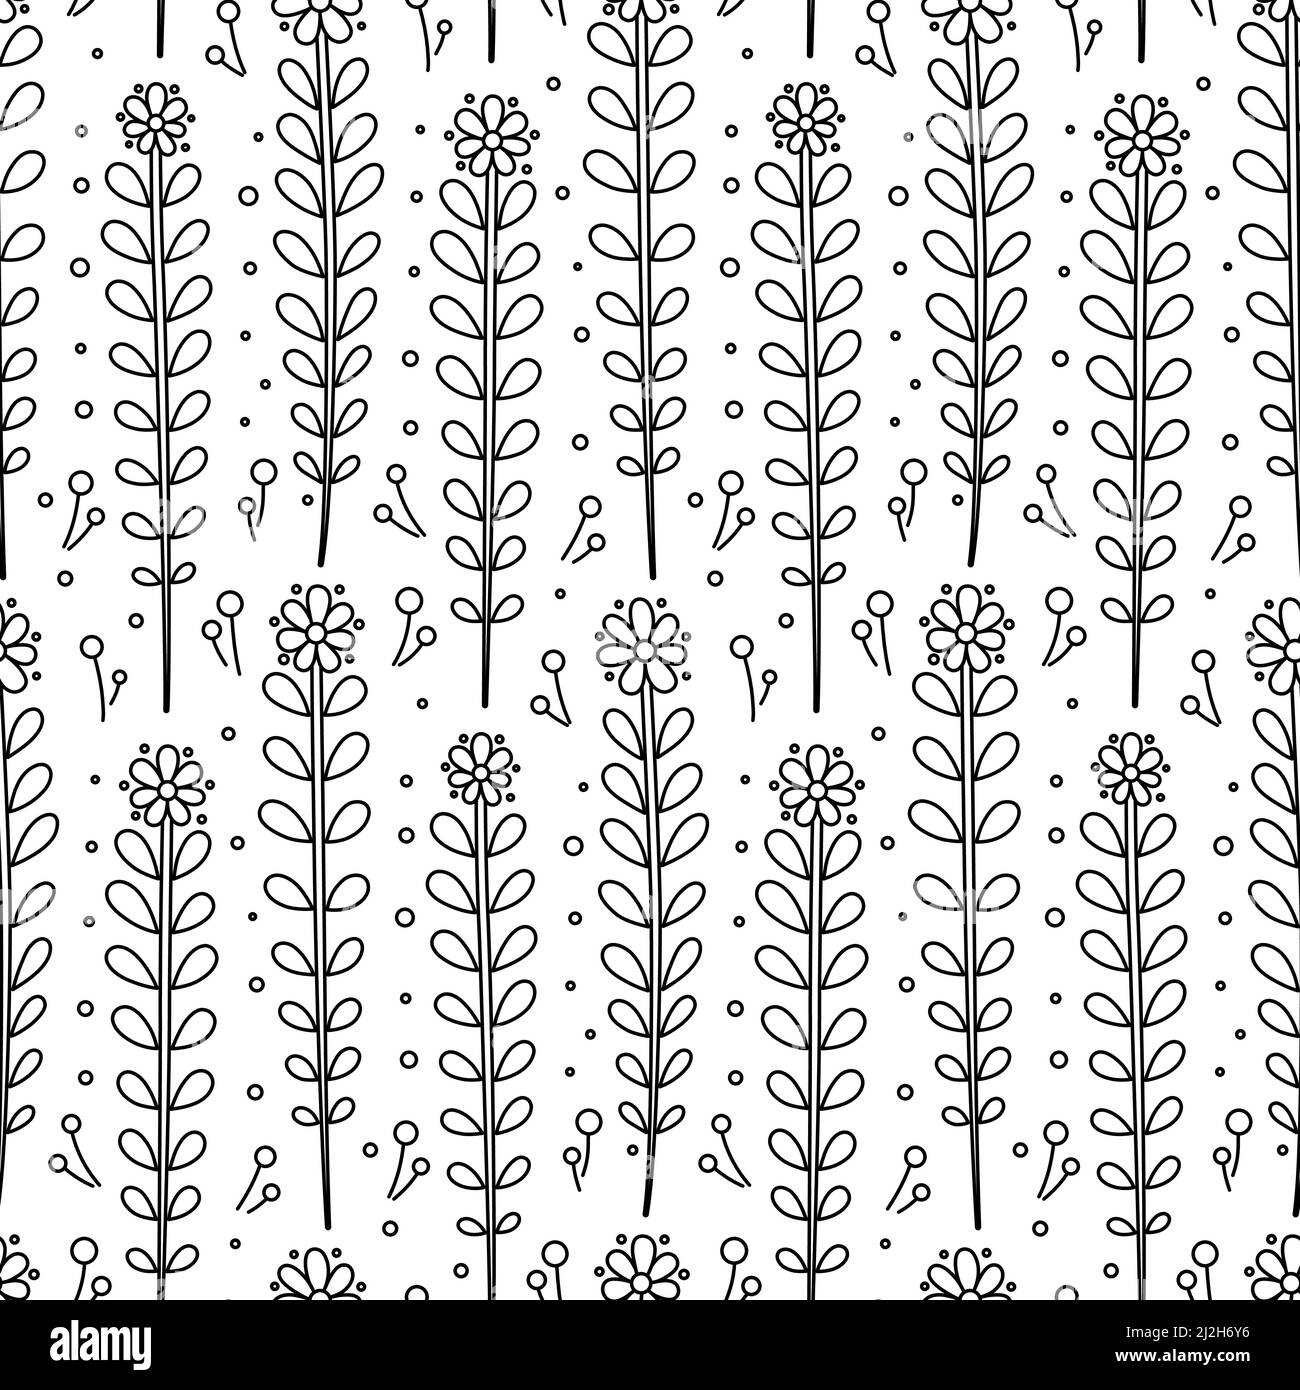 Black and White Hand Drawn Daisies Ditsy Vector Seamless Pattern Stock Vector